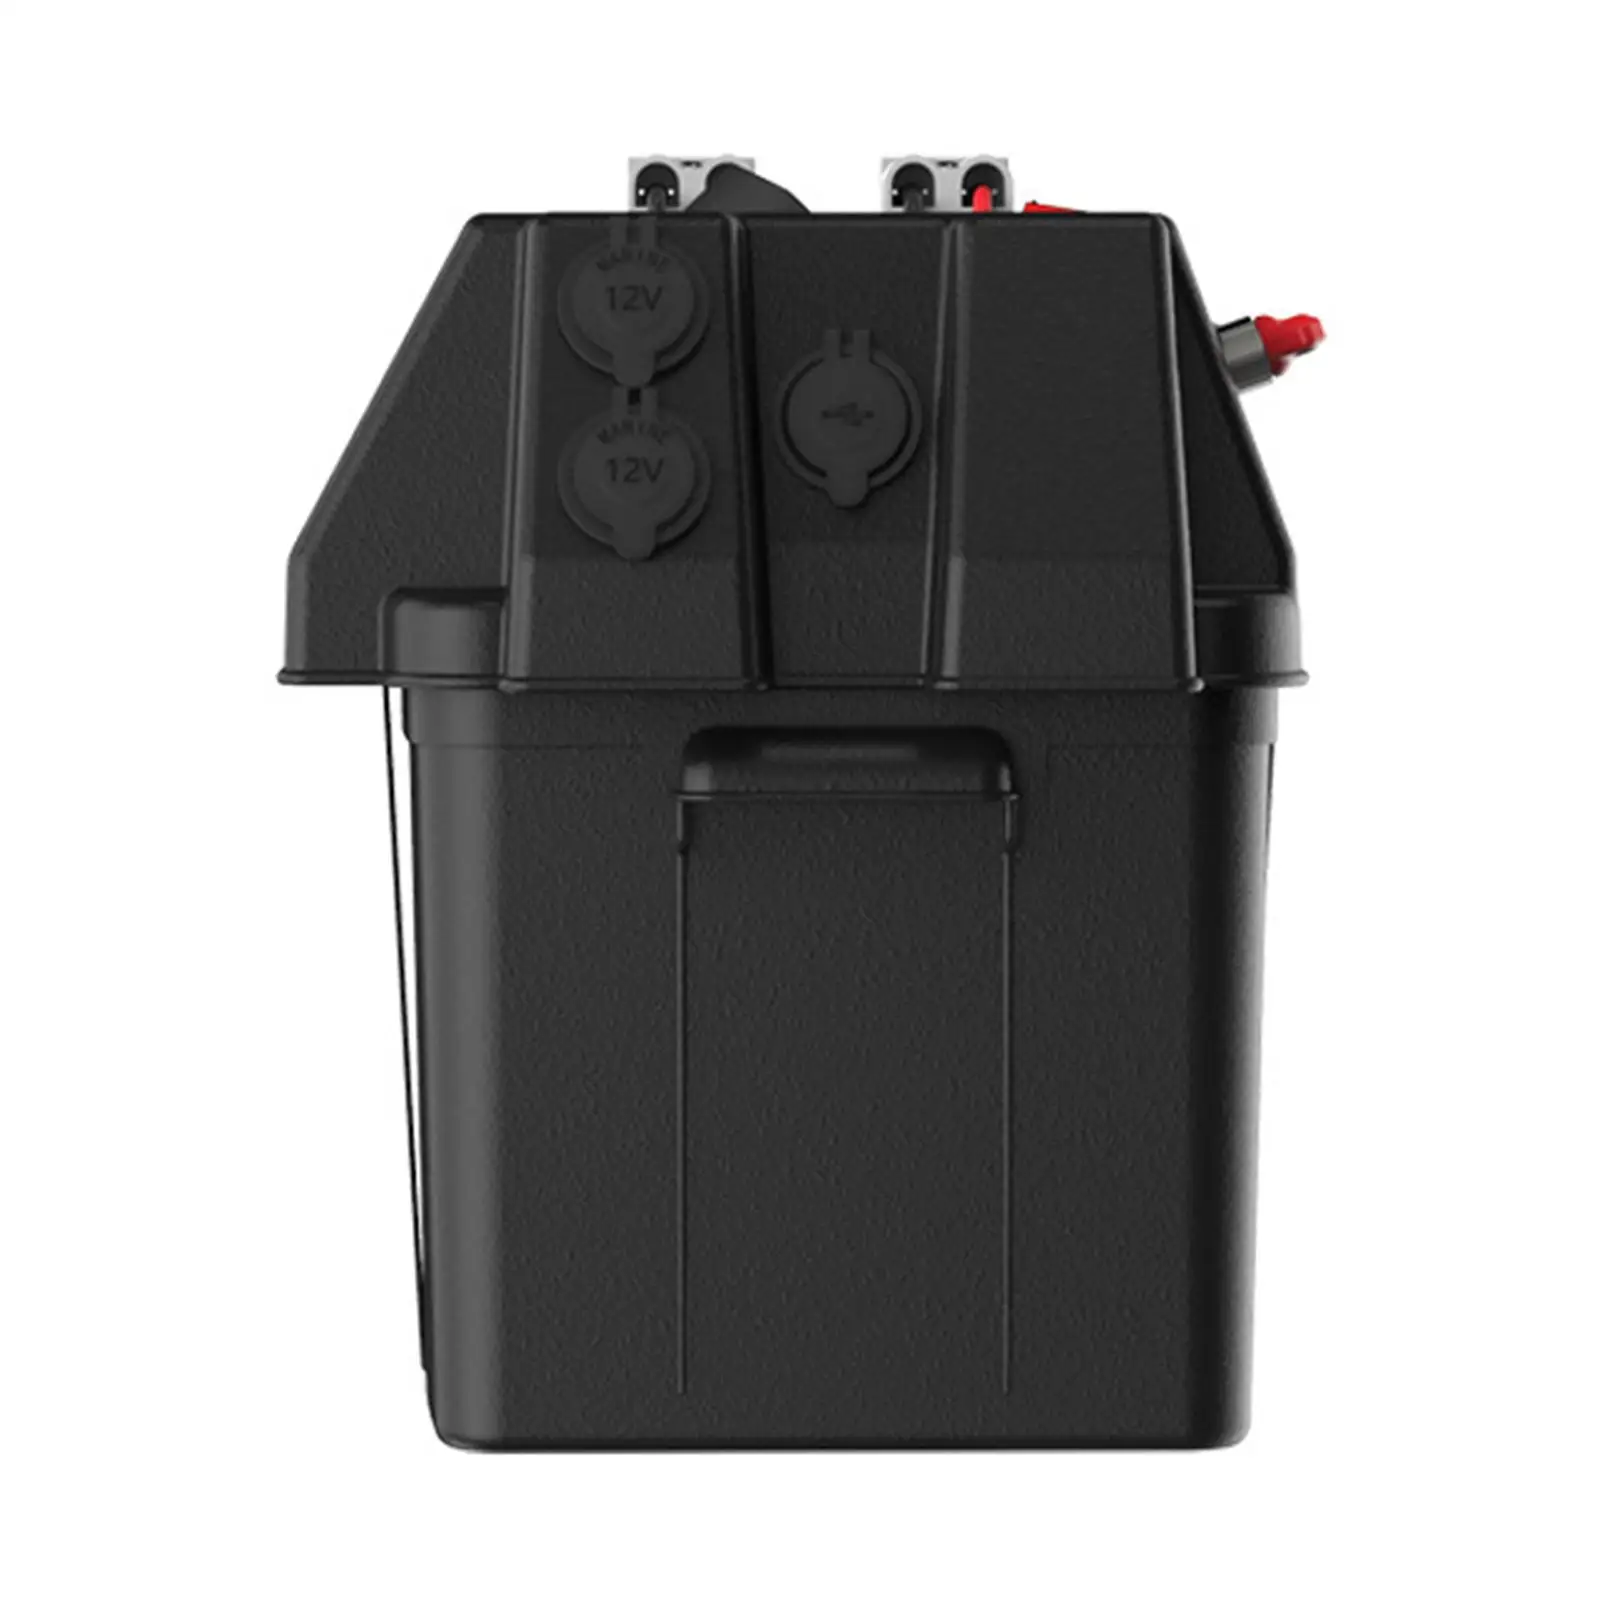 Motor Battery Box Multifunctional Easy to Carry Portable Dual USB Ports Battery Box for Travel SUV Camper Camping Trailer